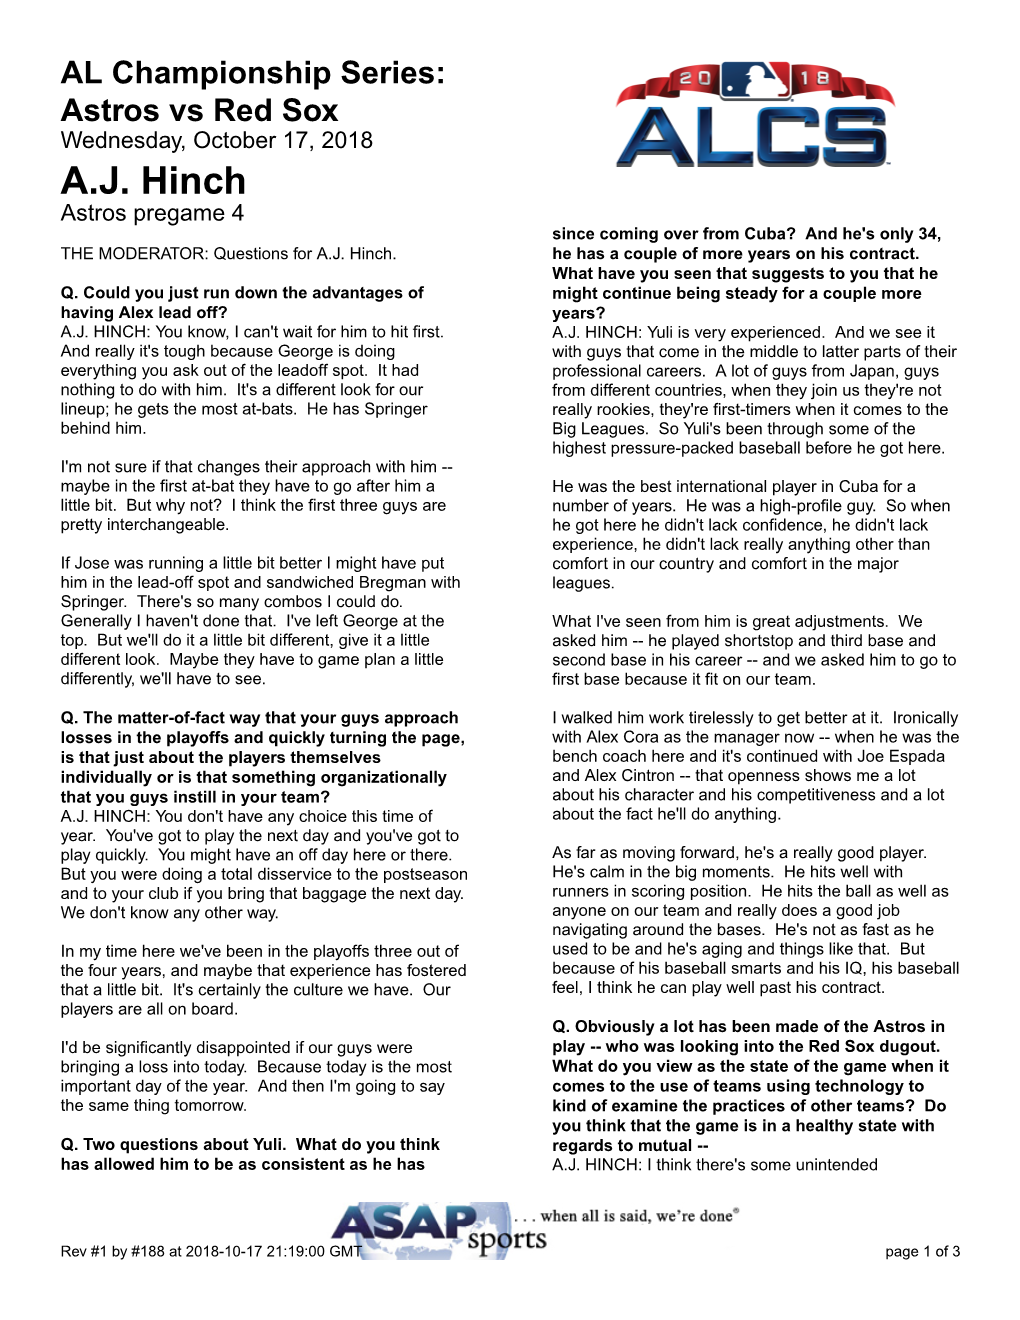 A.J. Hinch Astros Pregame 4 Since Coming Over from Cuba? and He's Only 34, the MODERATOR: Questions for A.J